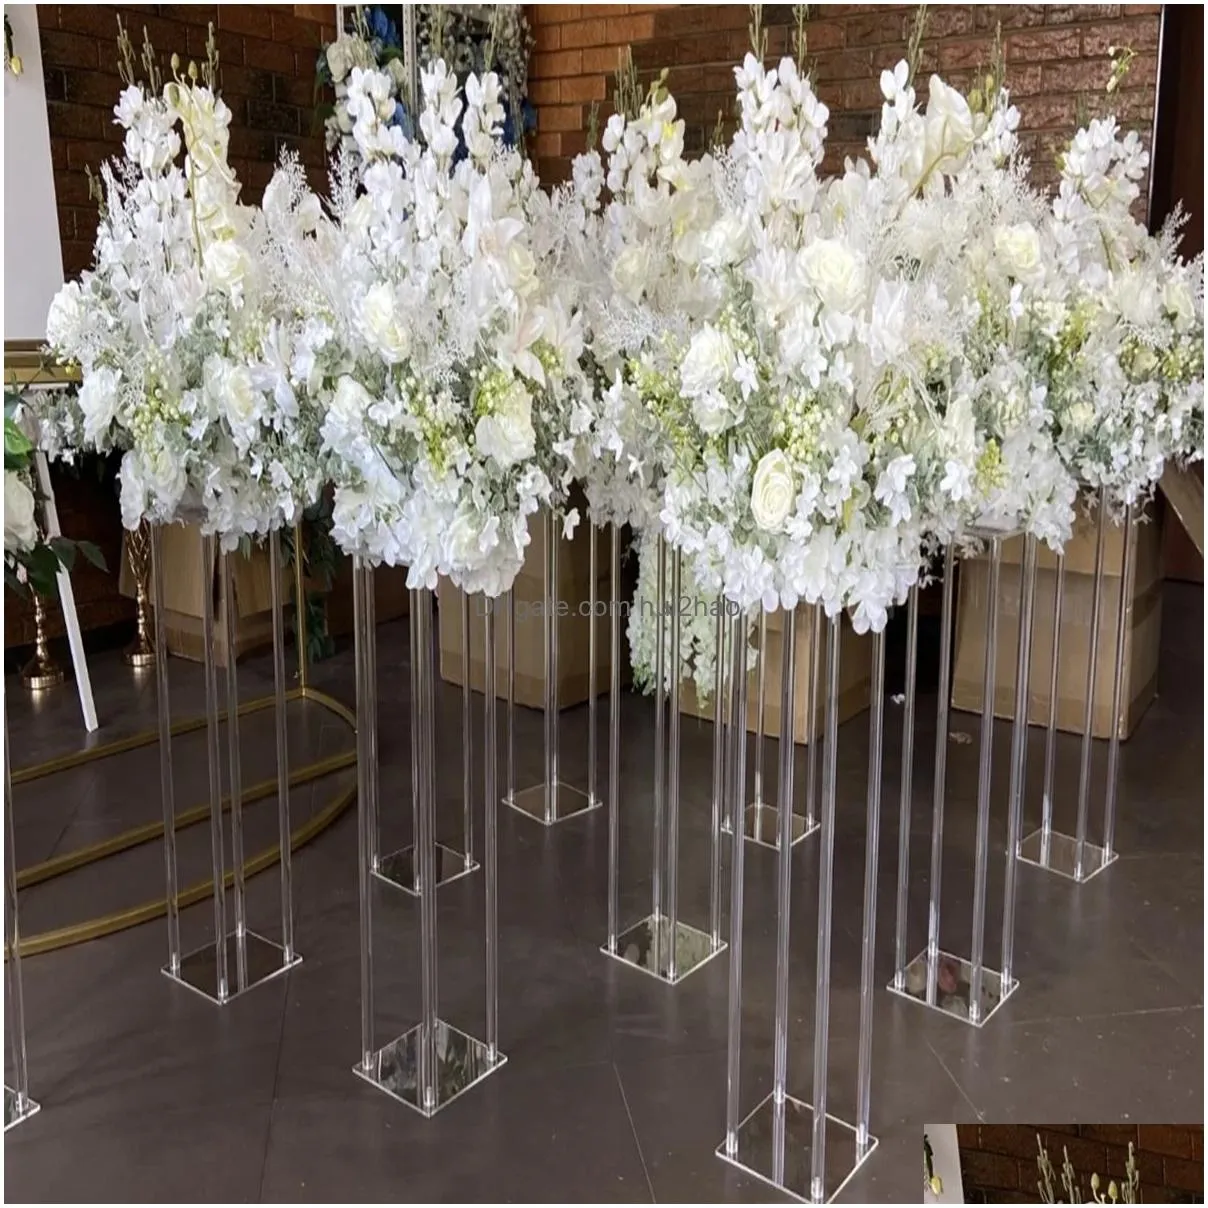 clear acrylic flower arch backdrop square flower stand for wedding stage table back drop decorationvents party wedding arch backdrop flower wall